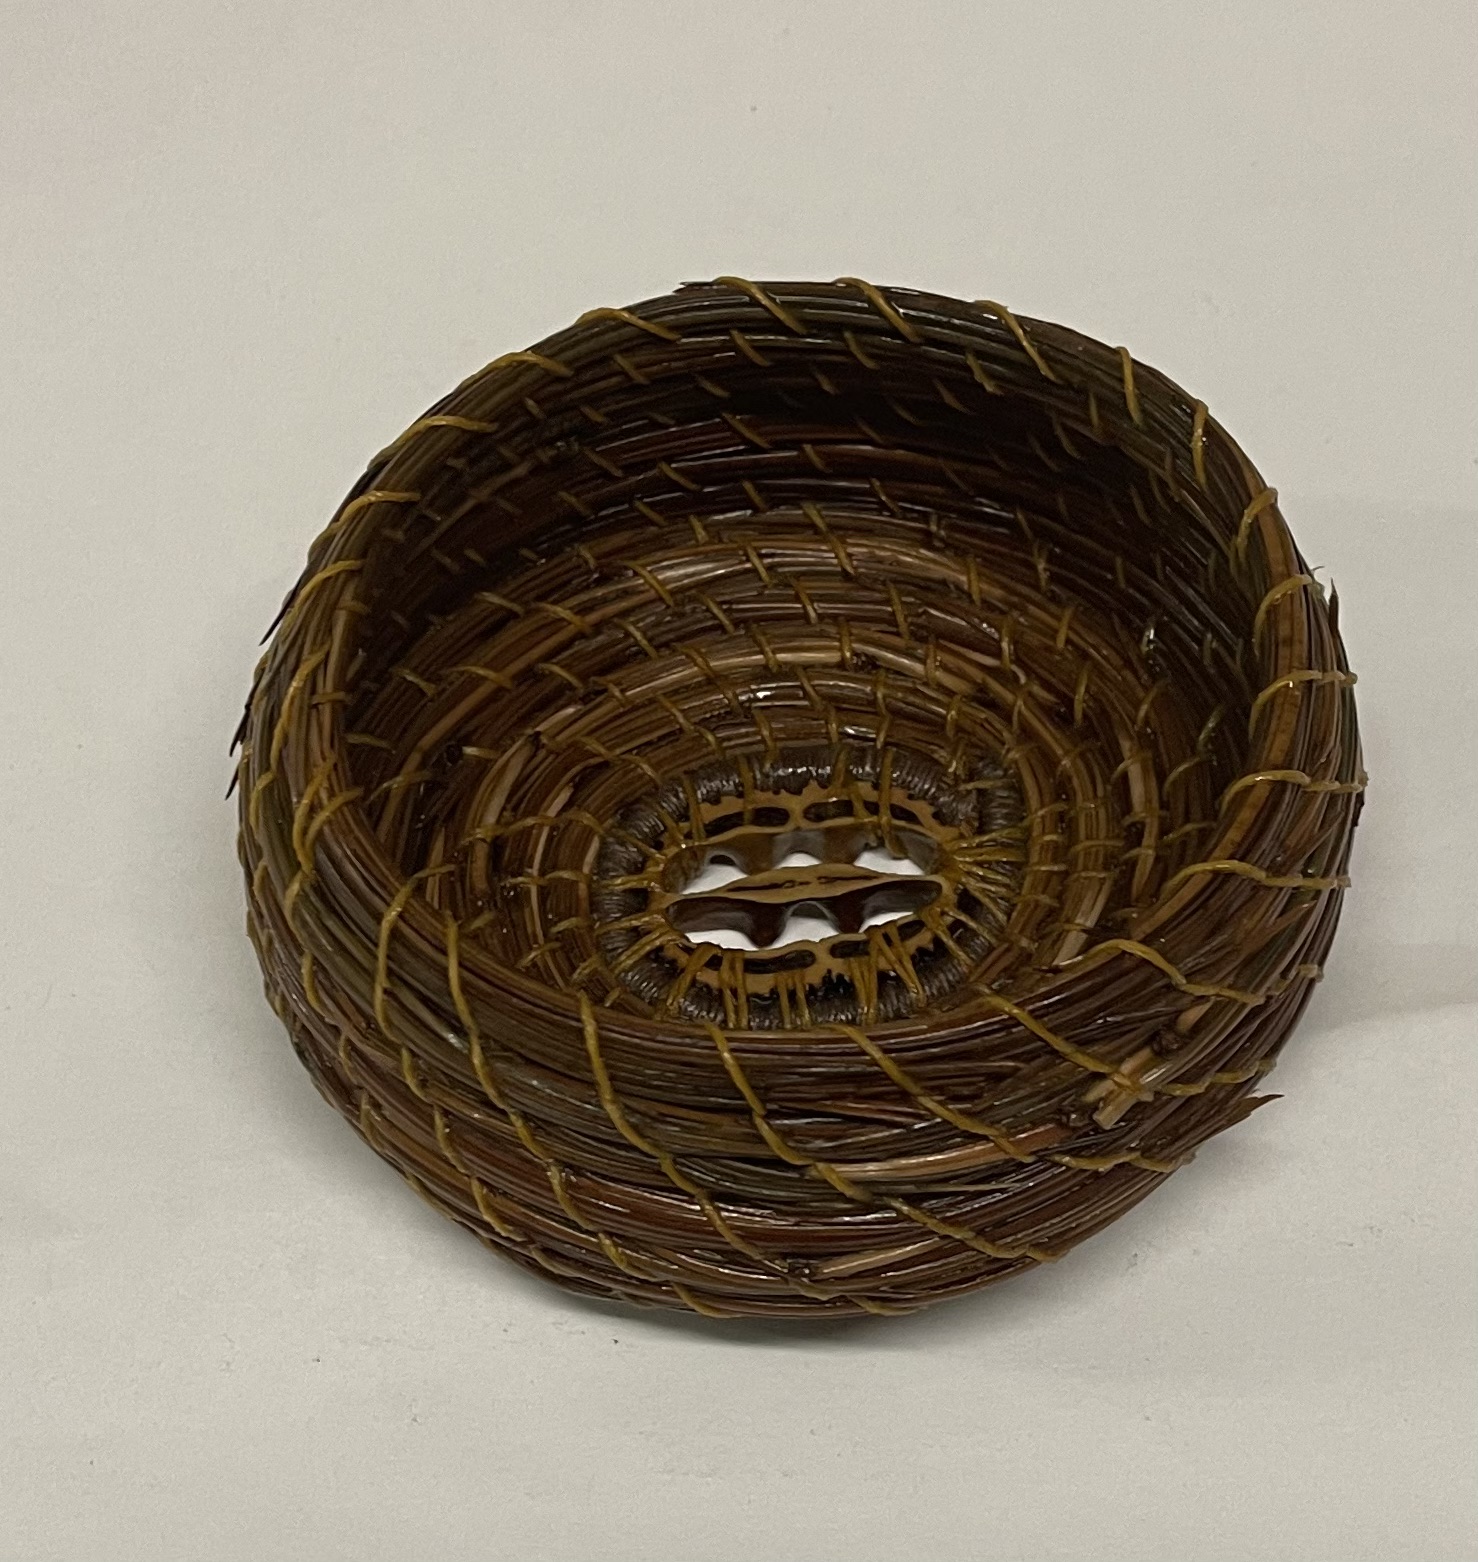 THE LOST ARTS - Pine Needle Baskets Class